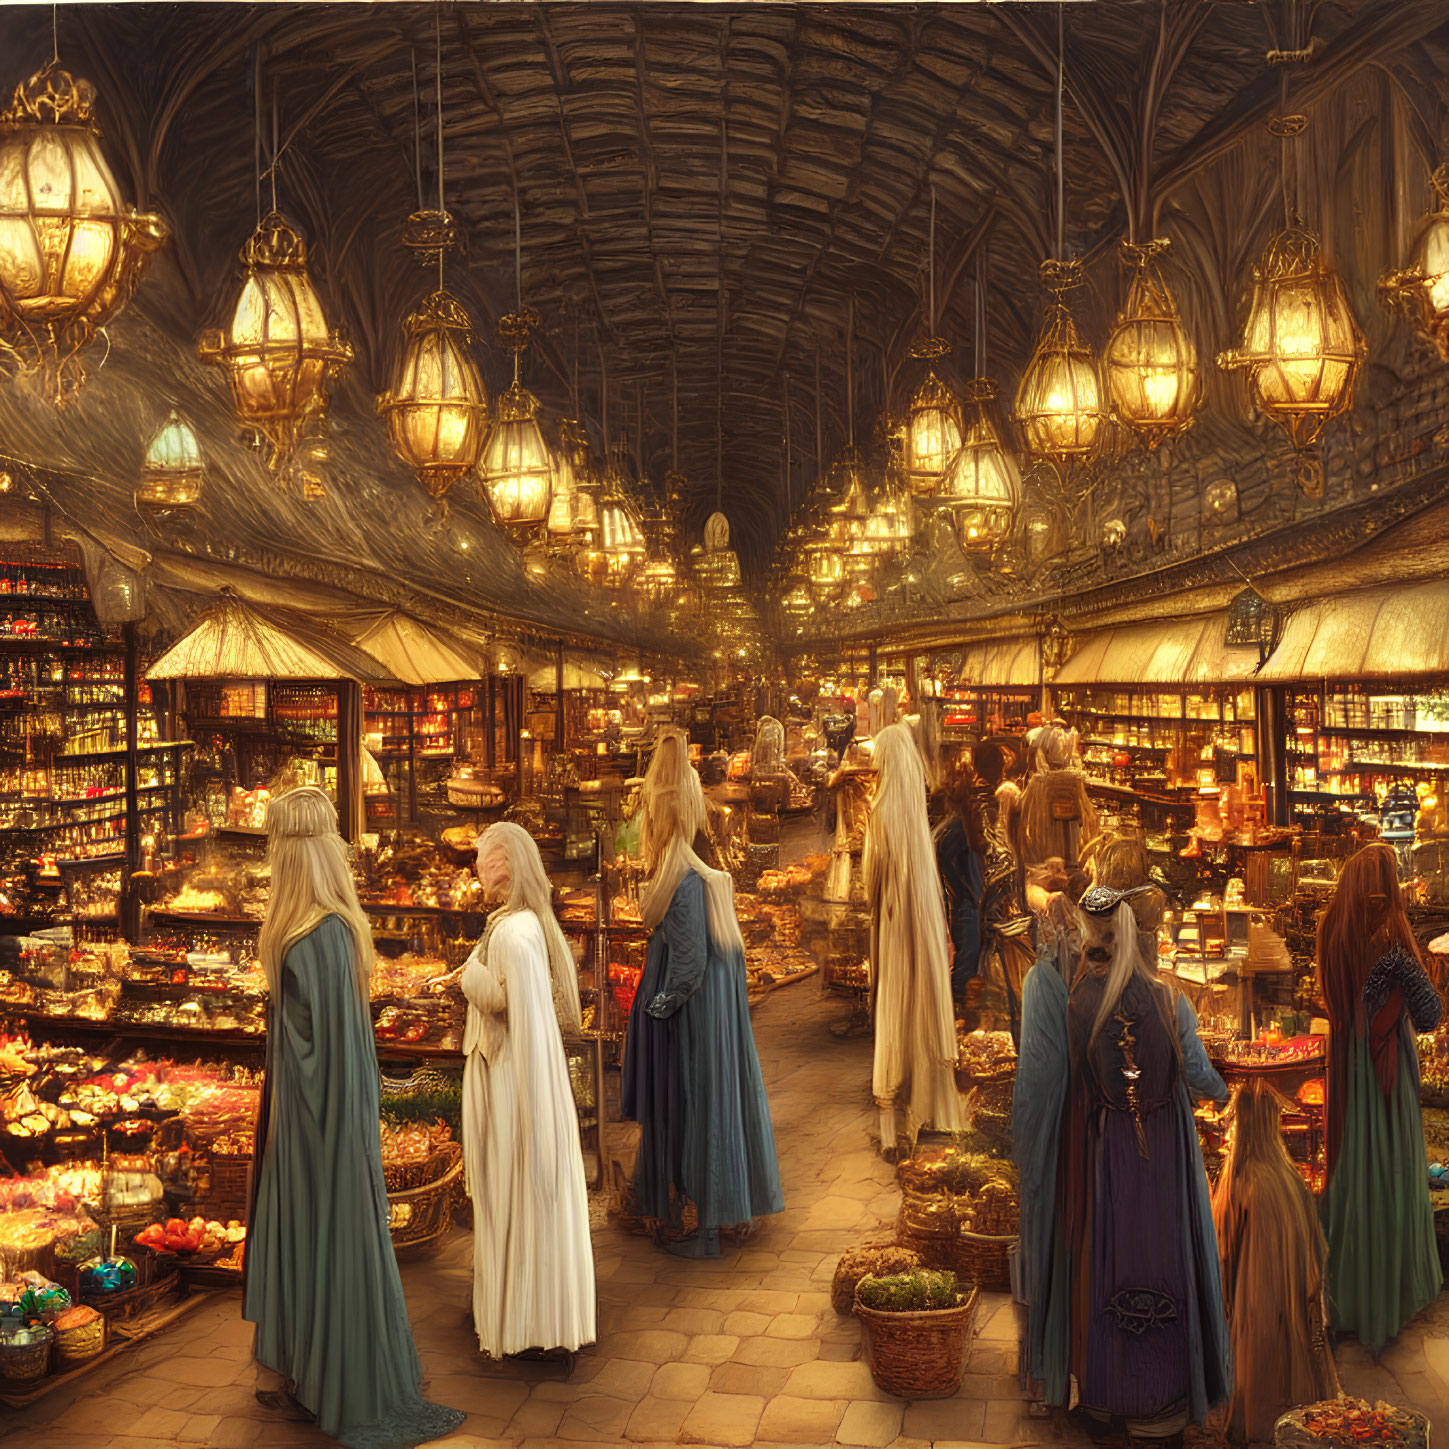 Detailed Fantasy Marketplace with Arched Ceiling and Colorful Stalls